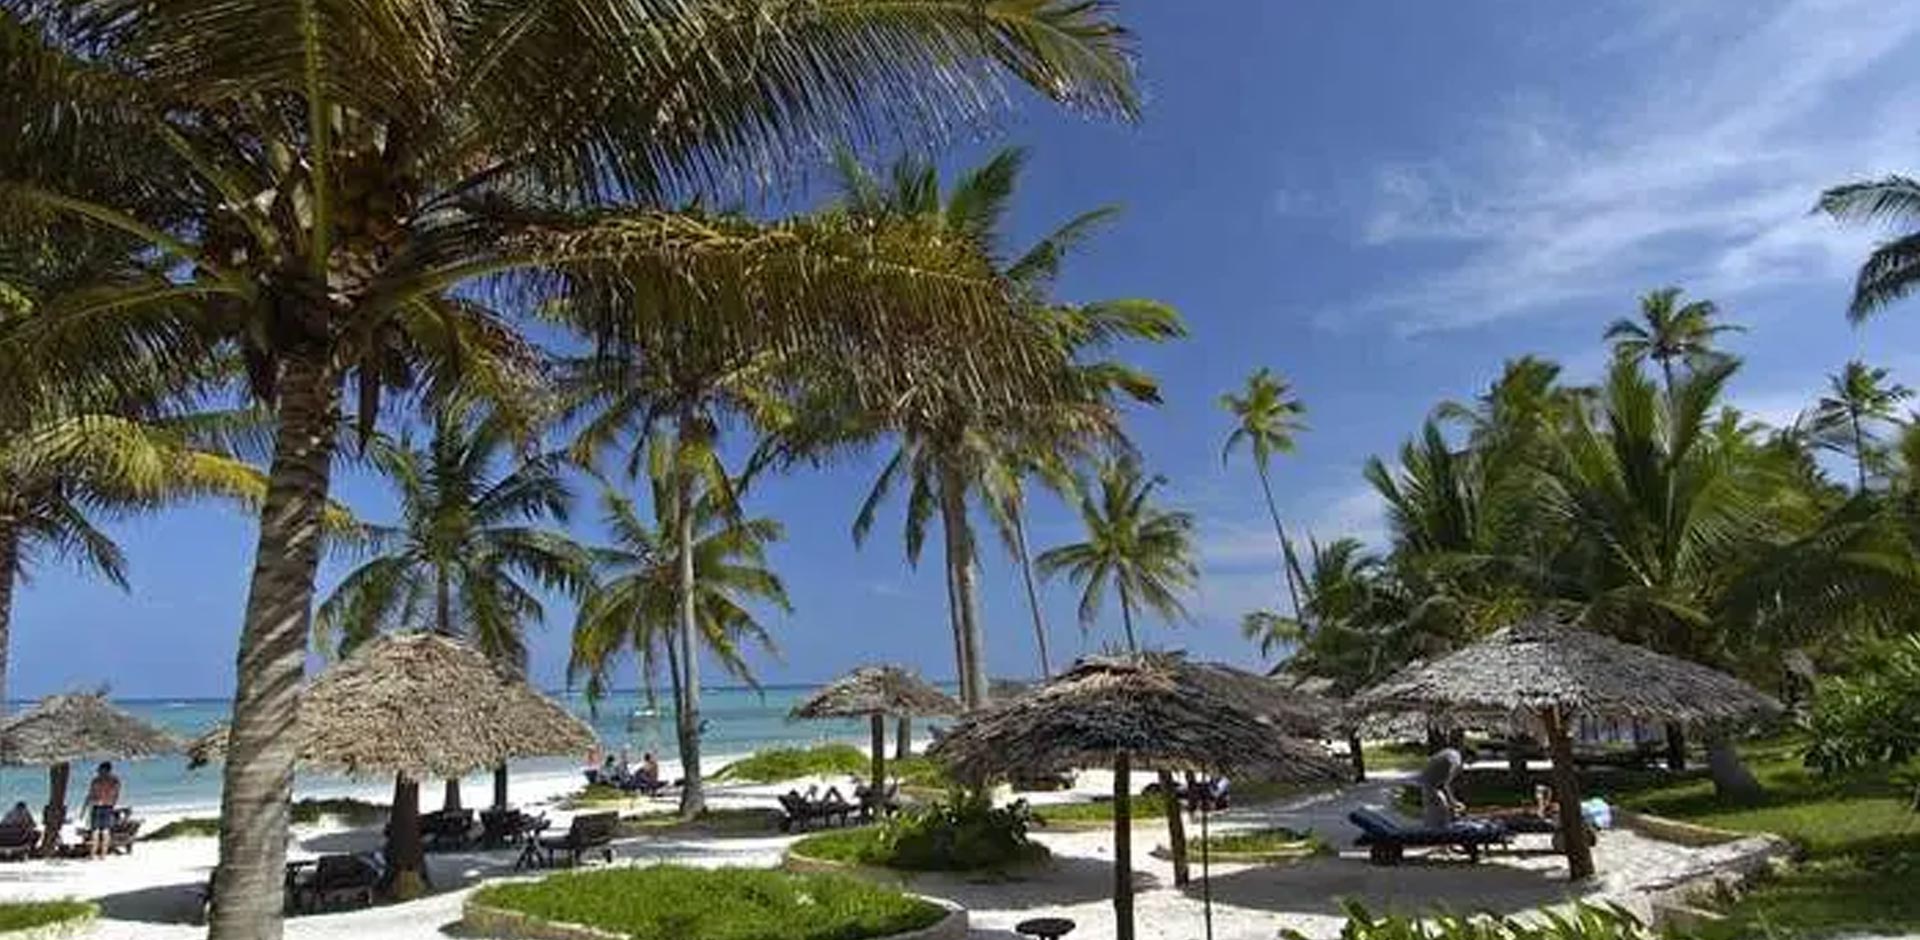 Zanzibar: An affordable destination for a holiday in the Indian Ocean - inews.co.uk